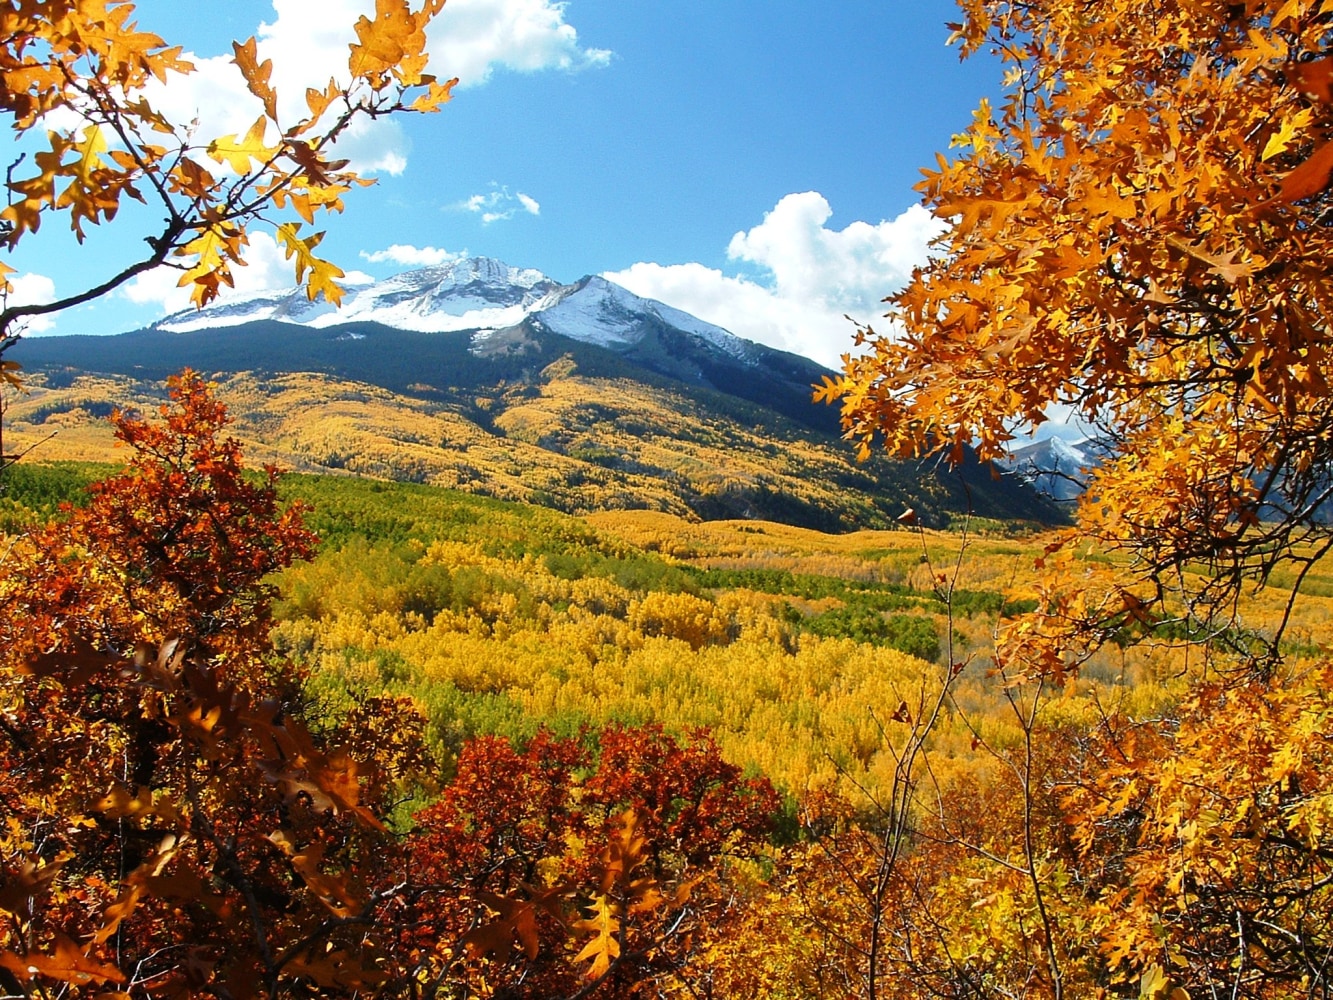 11 best places to see fall colors - NBC News